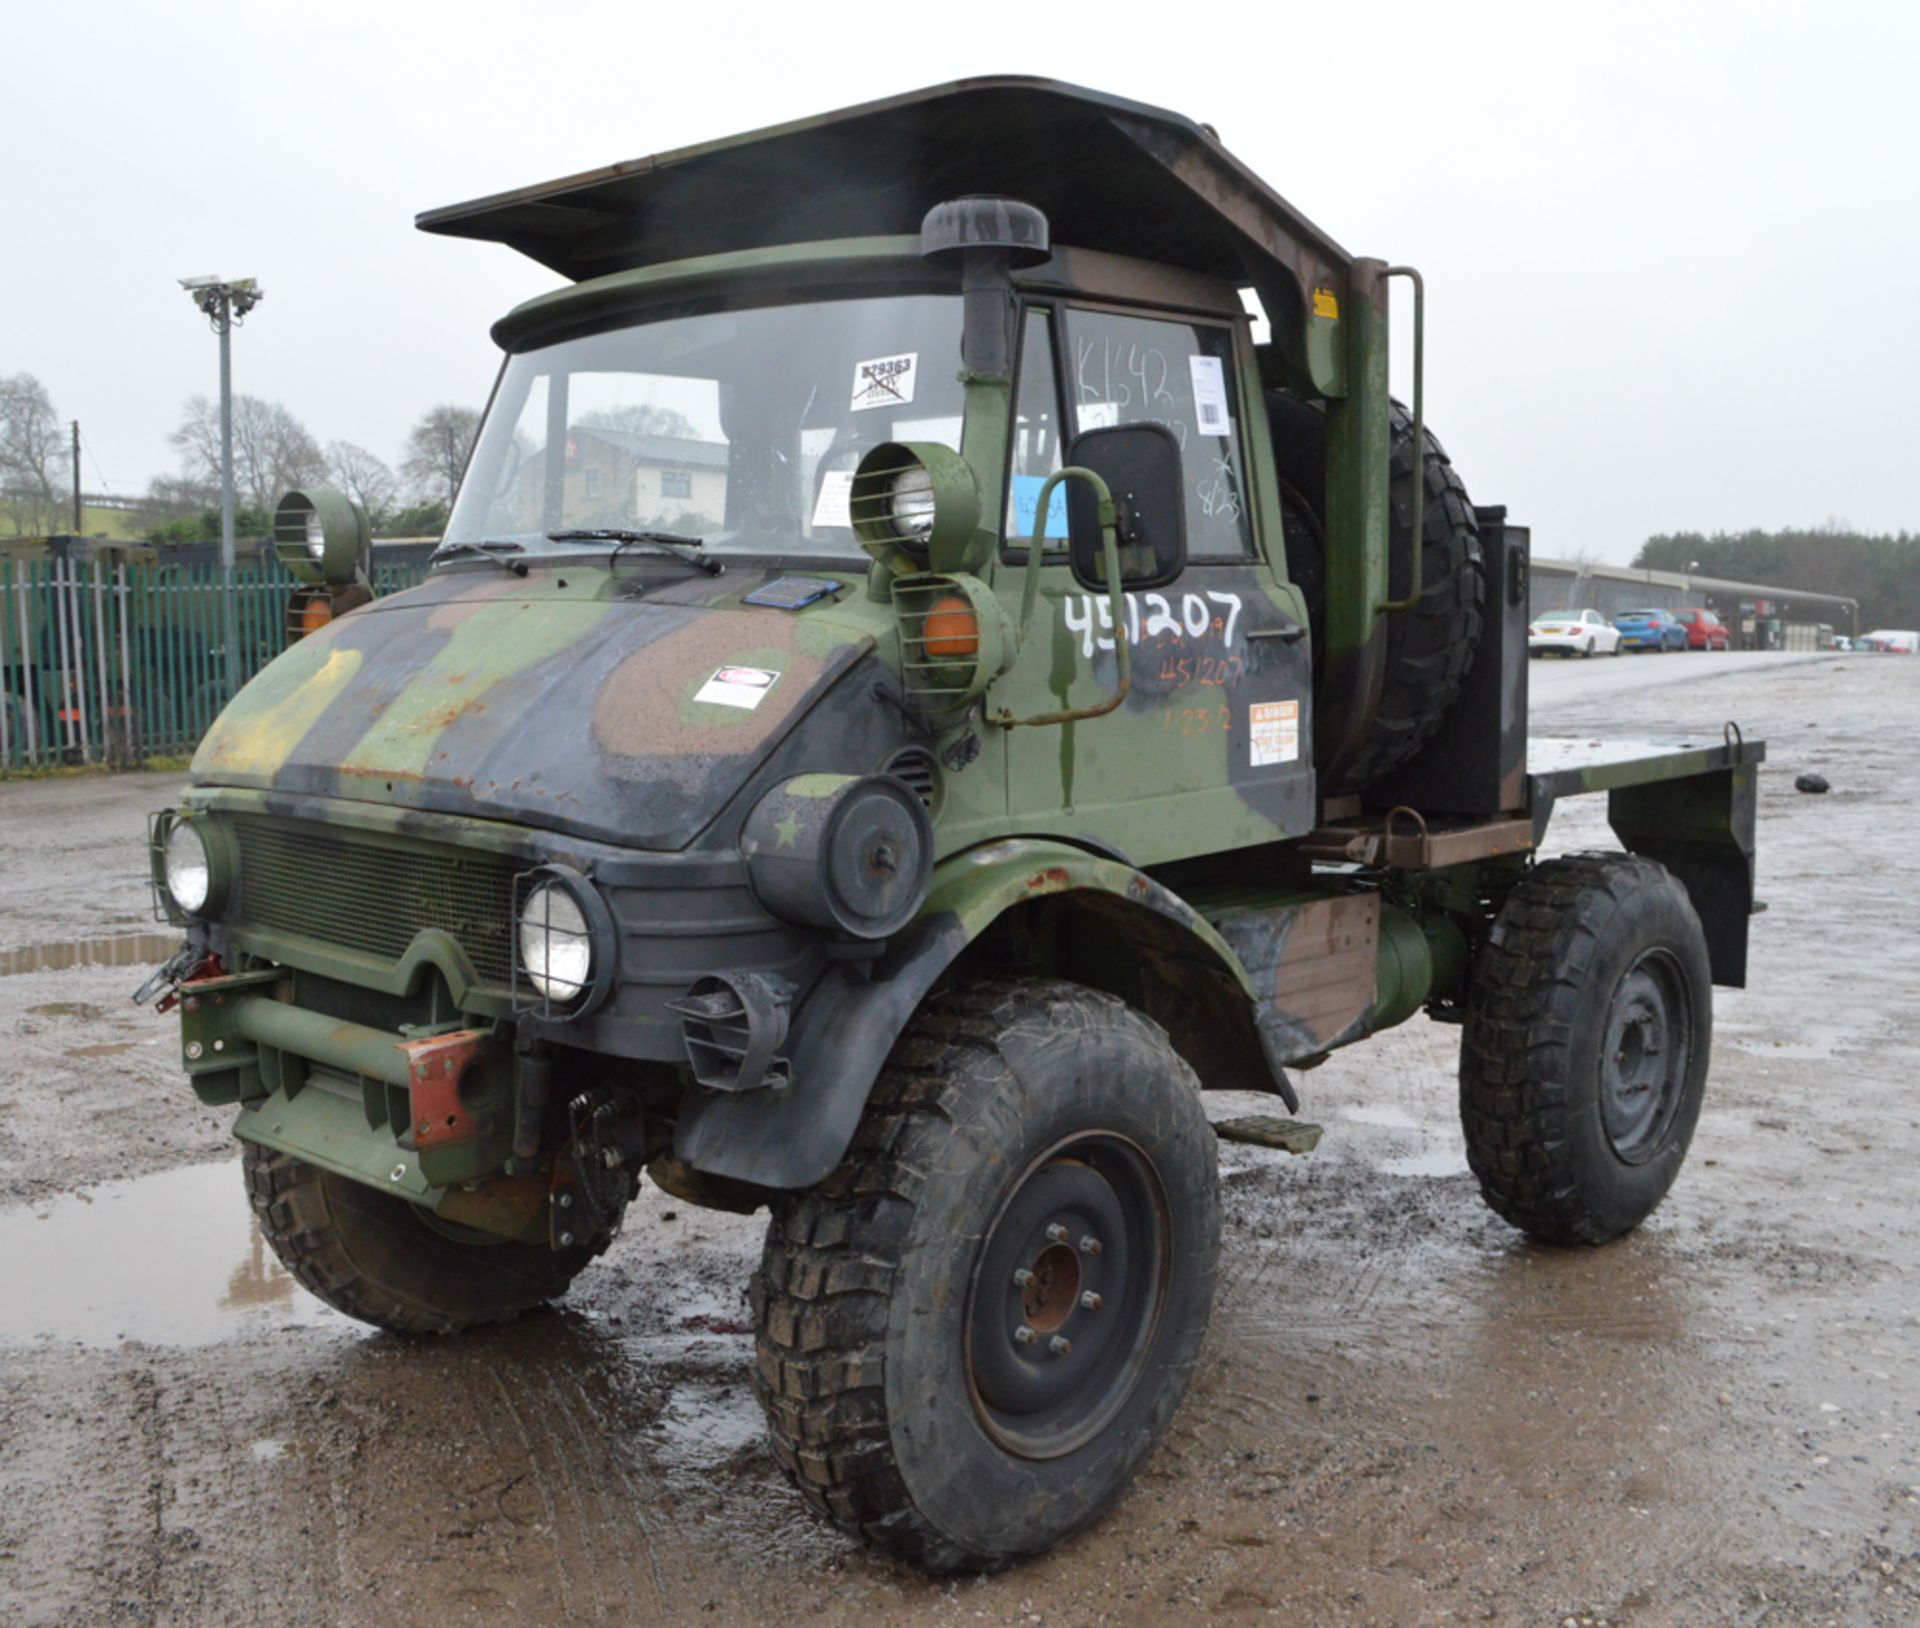 Mercedes Benz/Freightliner Unimog 419 4WD utility vehicle (Ex US Army) Year: 1988 Serial Number: - Image 2 of 8